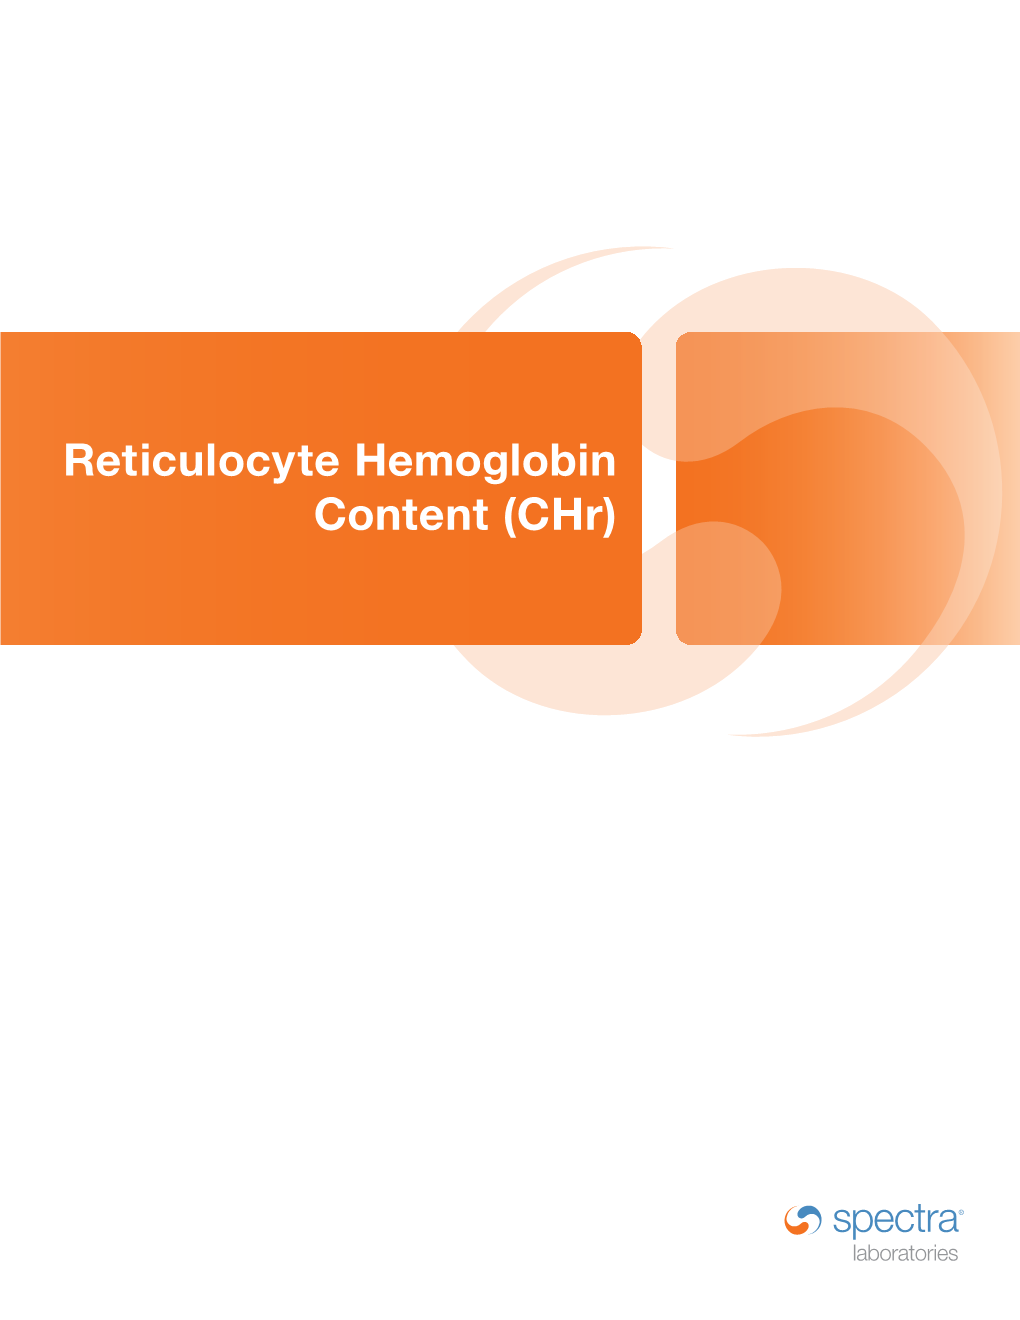 Reticulocyte Hemoglobin Content (Chr) a Test for Diagnosing Iron Deficiency